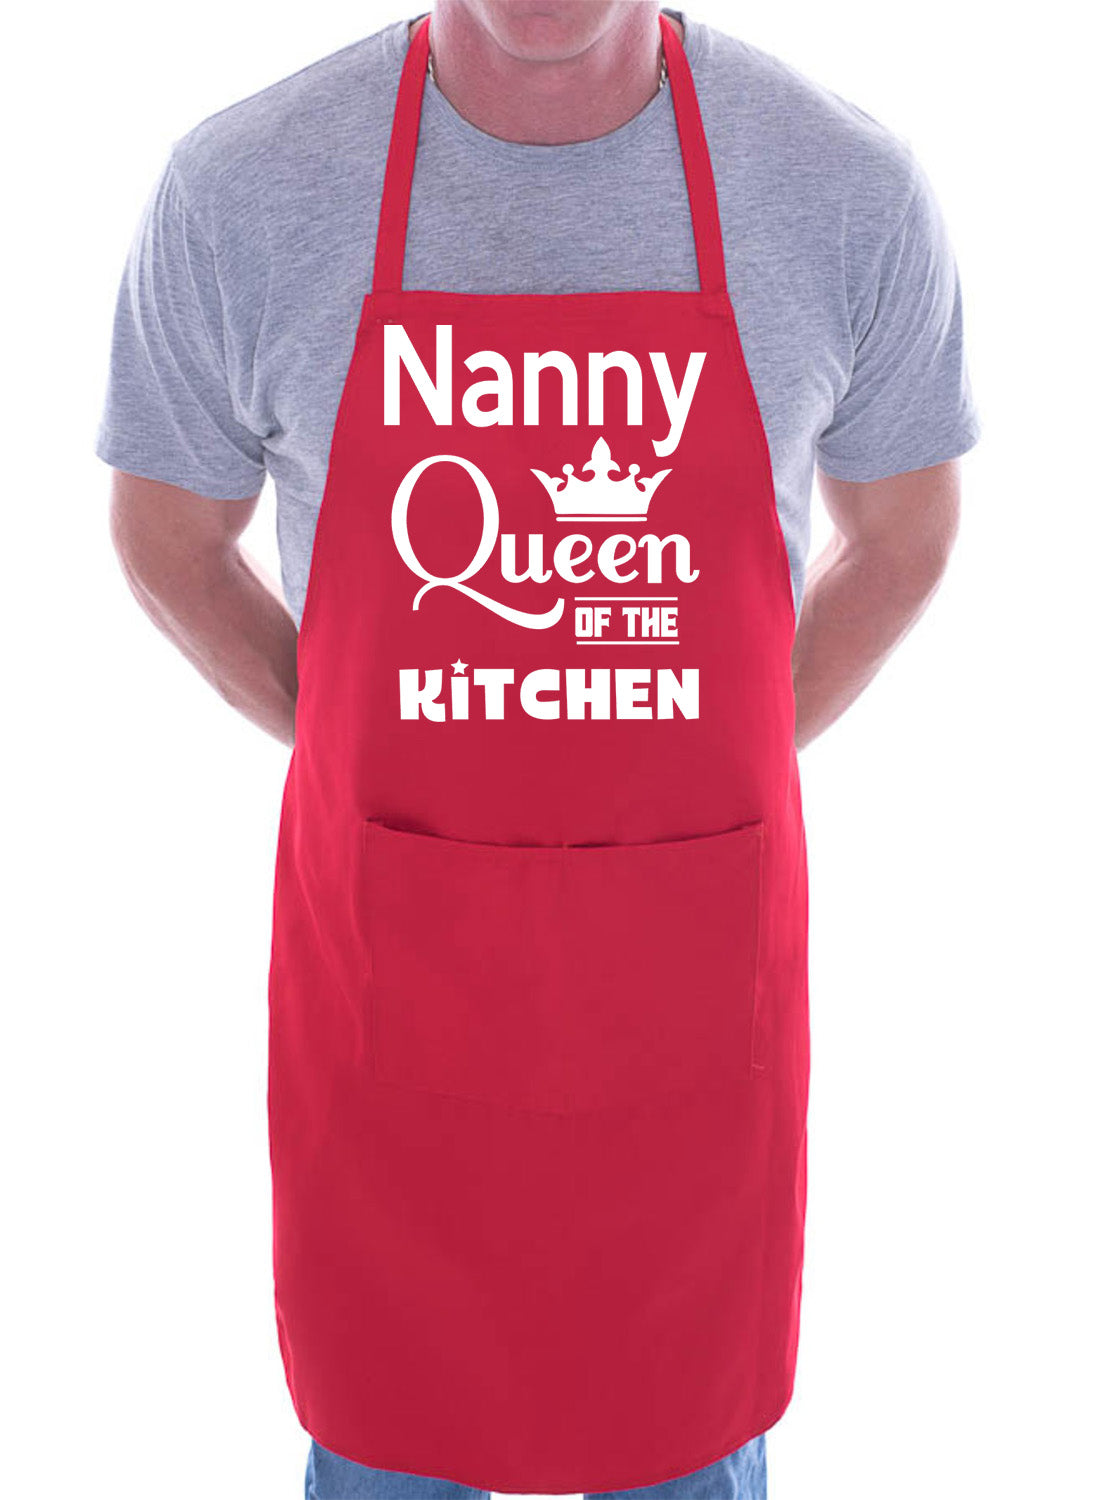 Nanny Queen Of The Kitchen Funny Chef Birthday Gift Novelty Cooking BBQ Apron